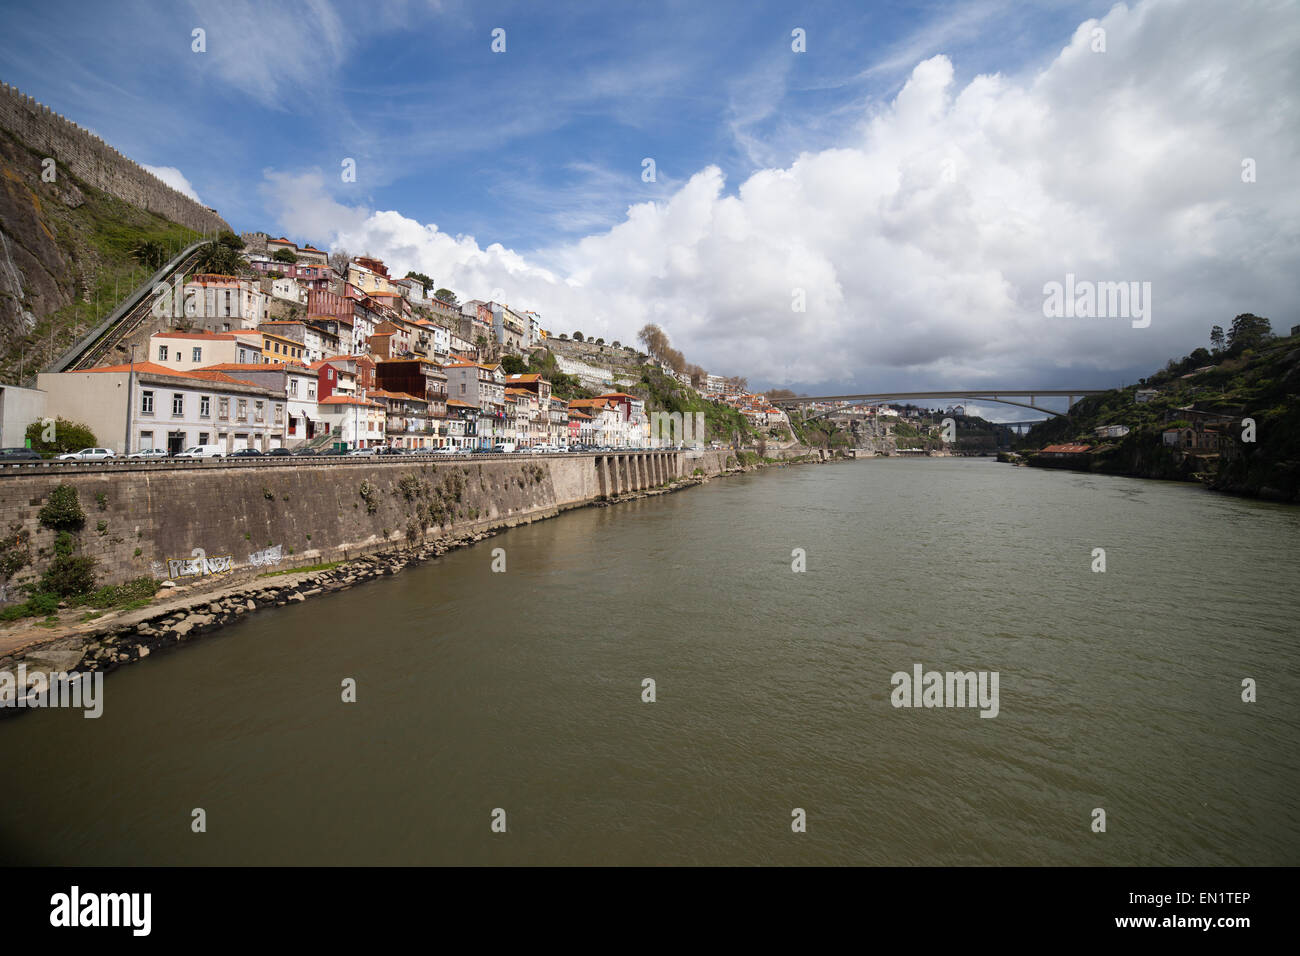 Douro river embankment along old city of Porto in Portugal. Stock Photo